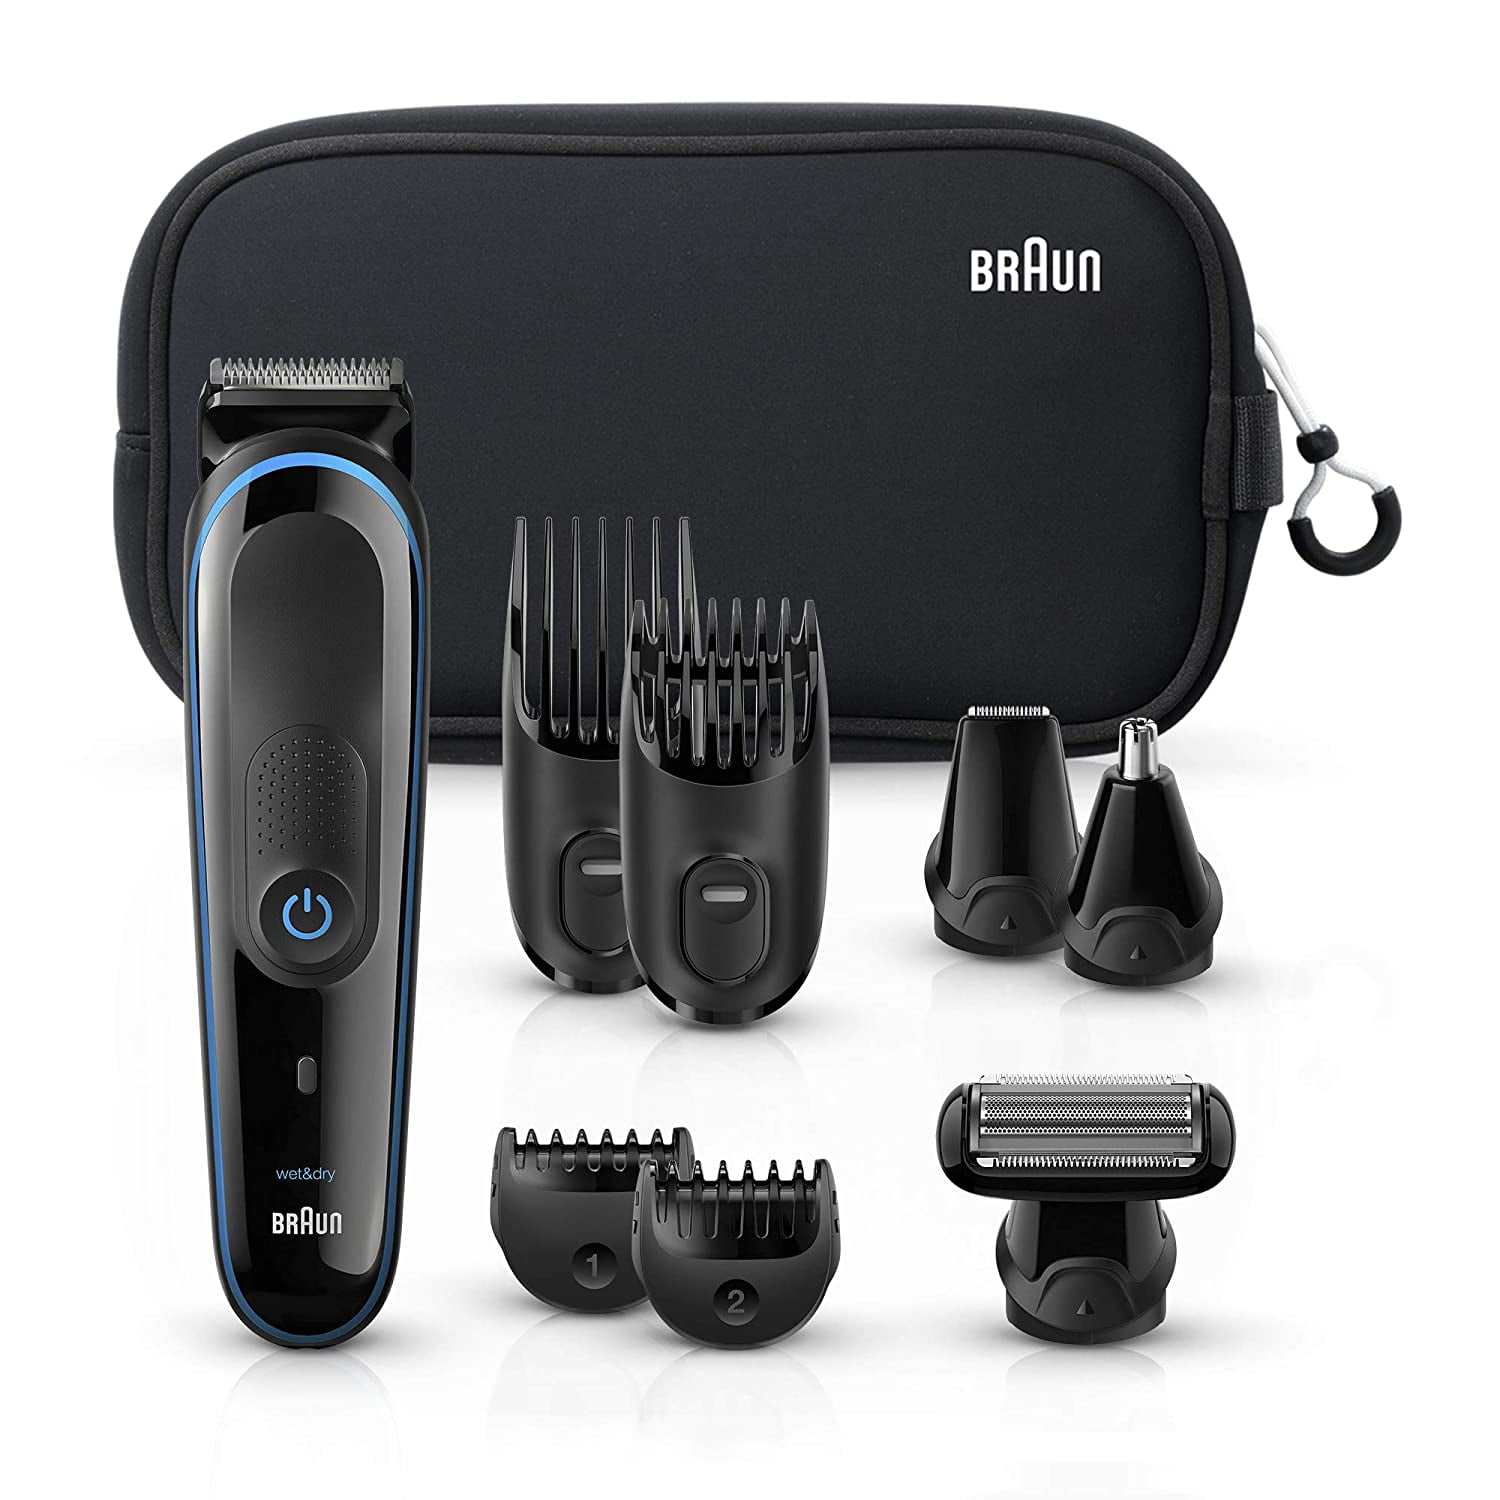 braun professional hair clippers